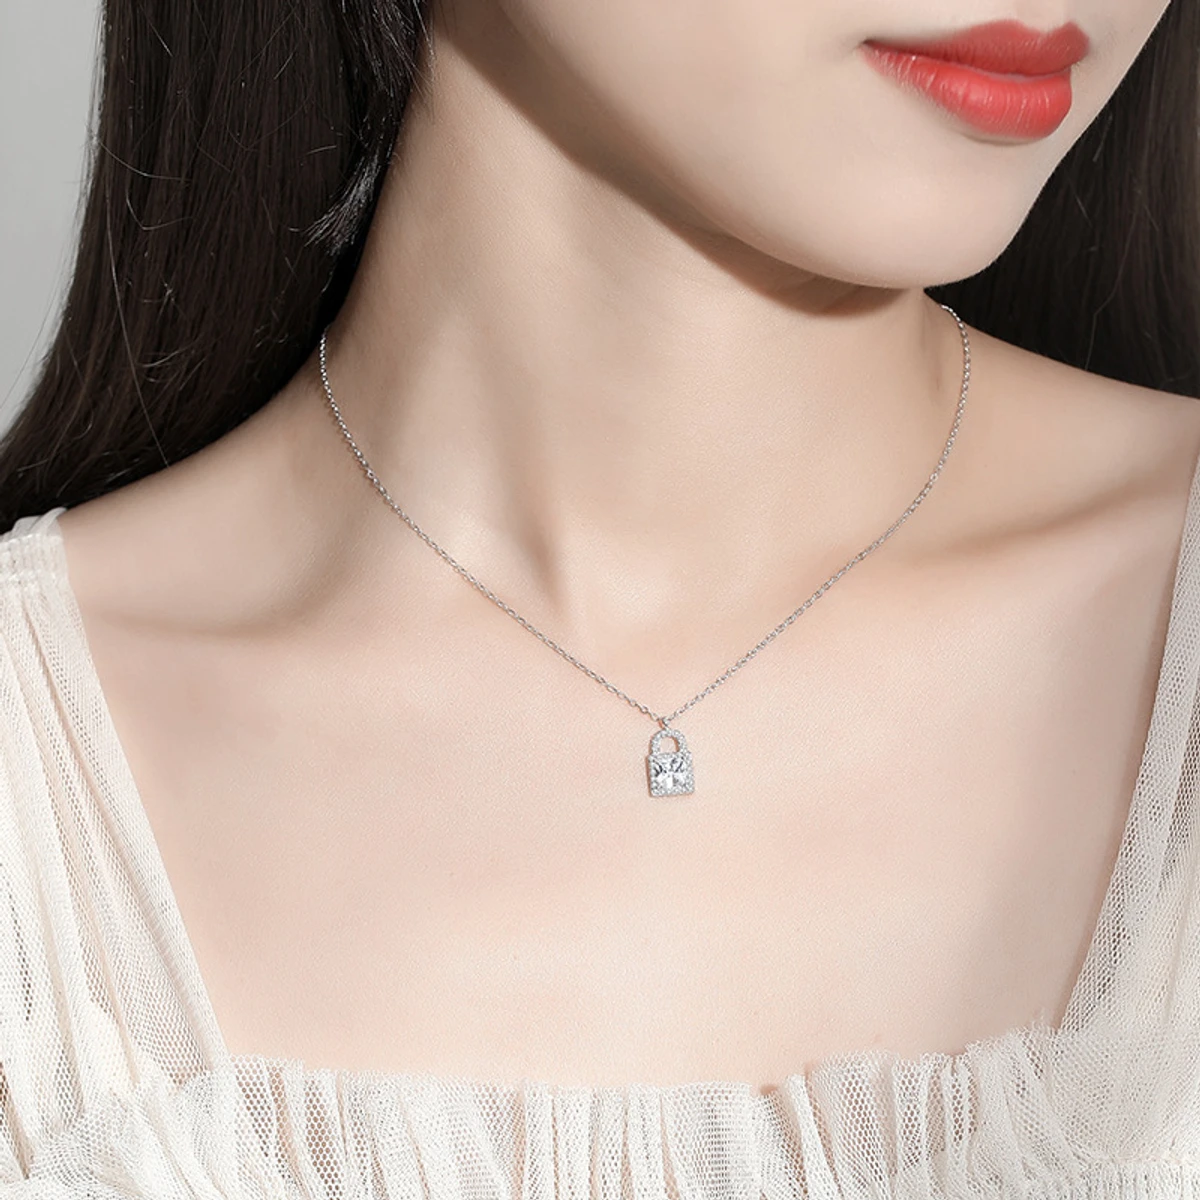 New Stylish Lock Stone Necklace For Woman